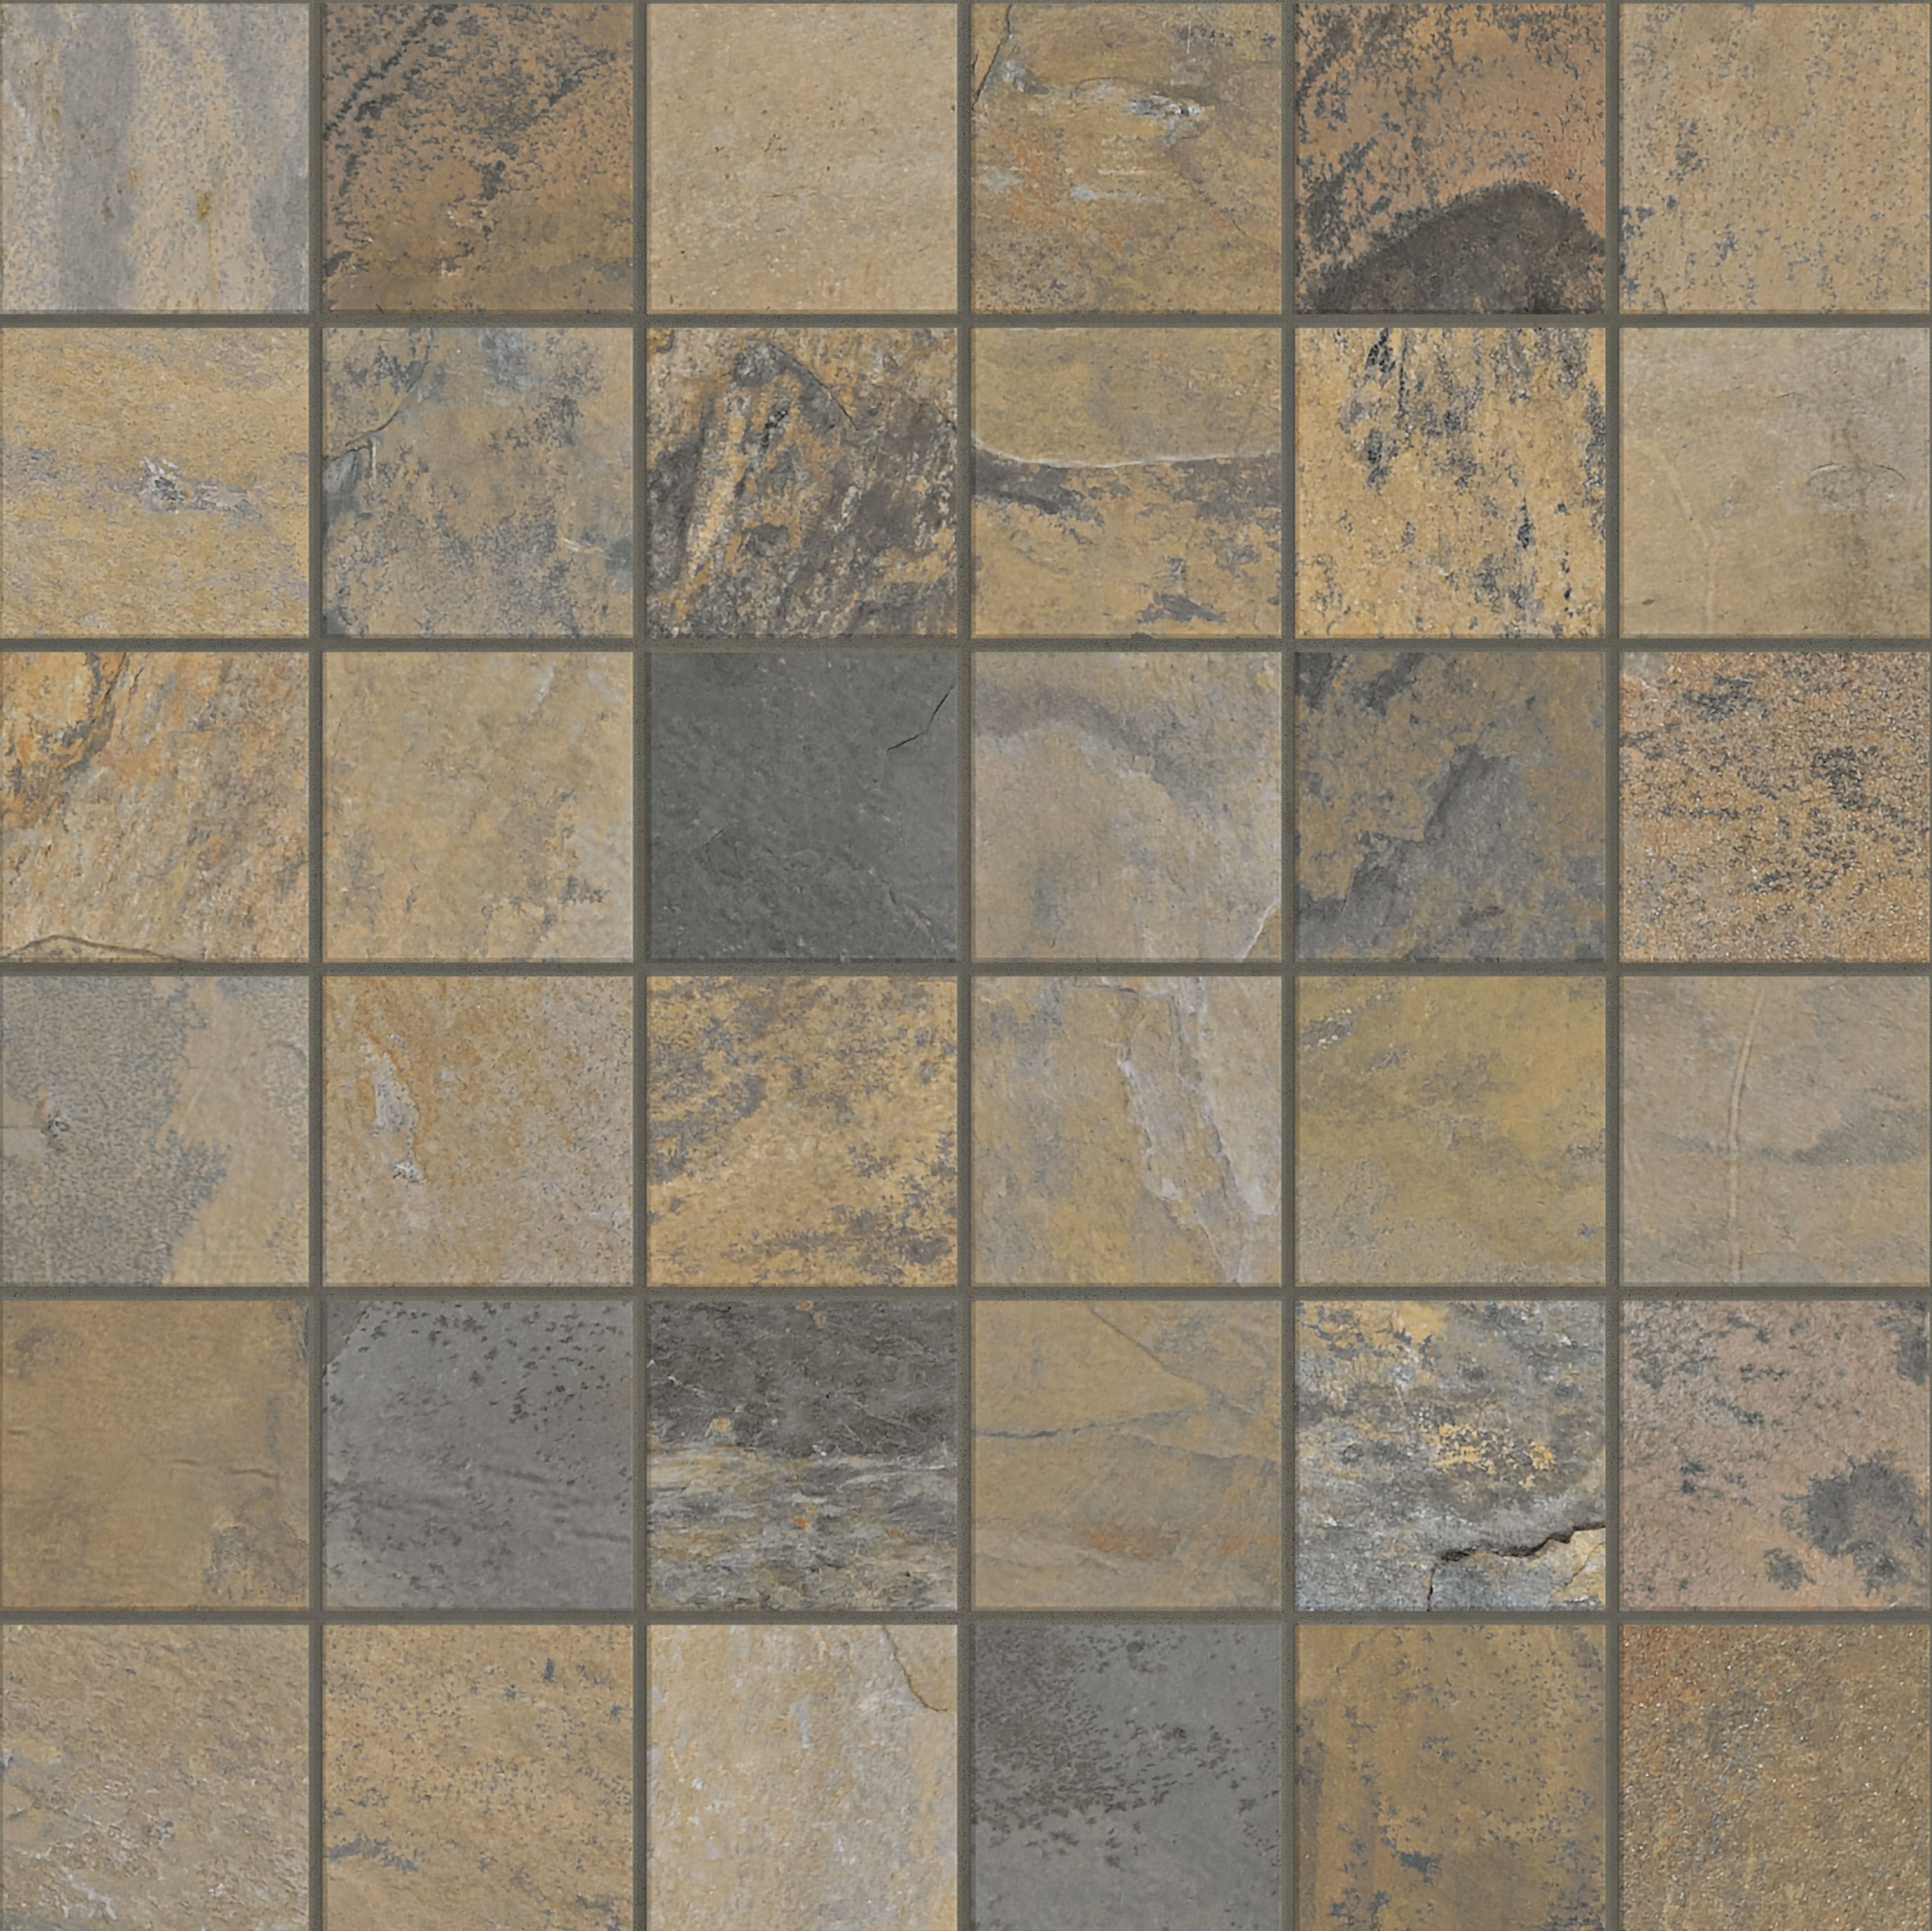 landmark 9mm essence rustic gold straight stack 2x2 mosaic 12x12x9mm matte rectified porcelain tile distributed by surface group international